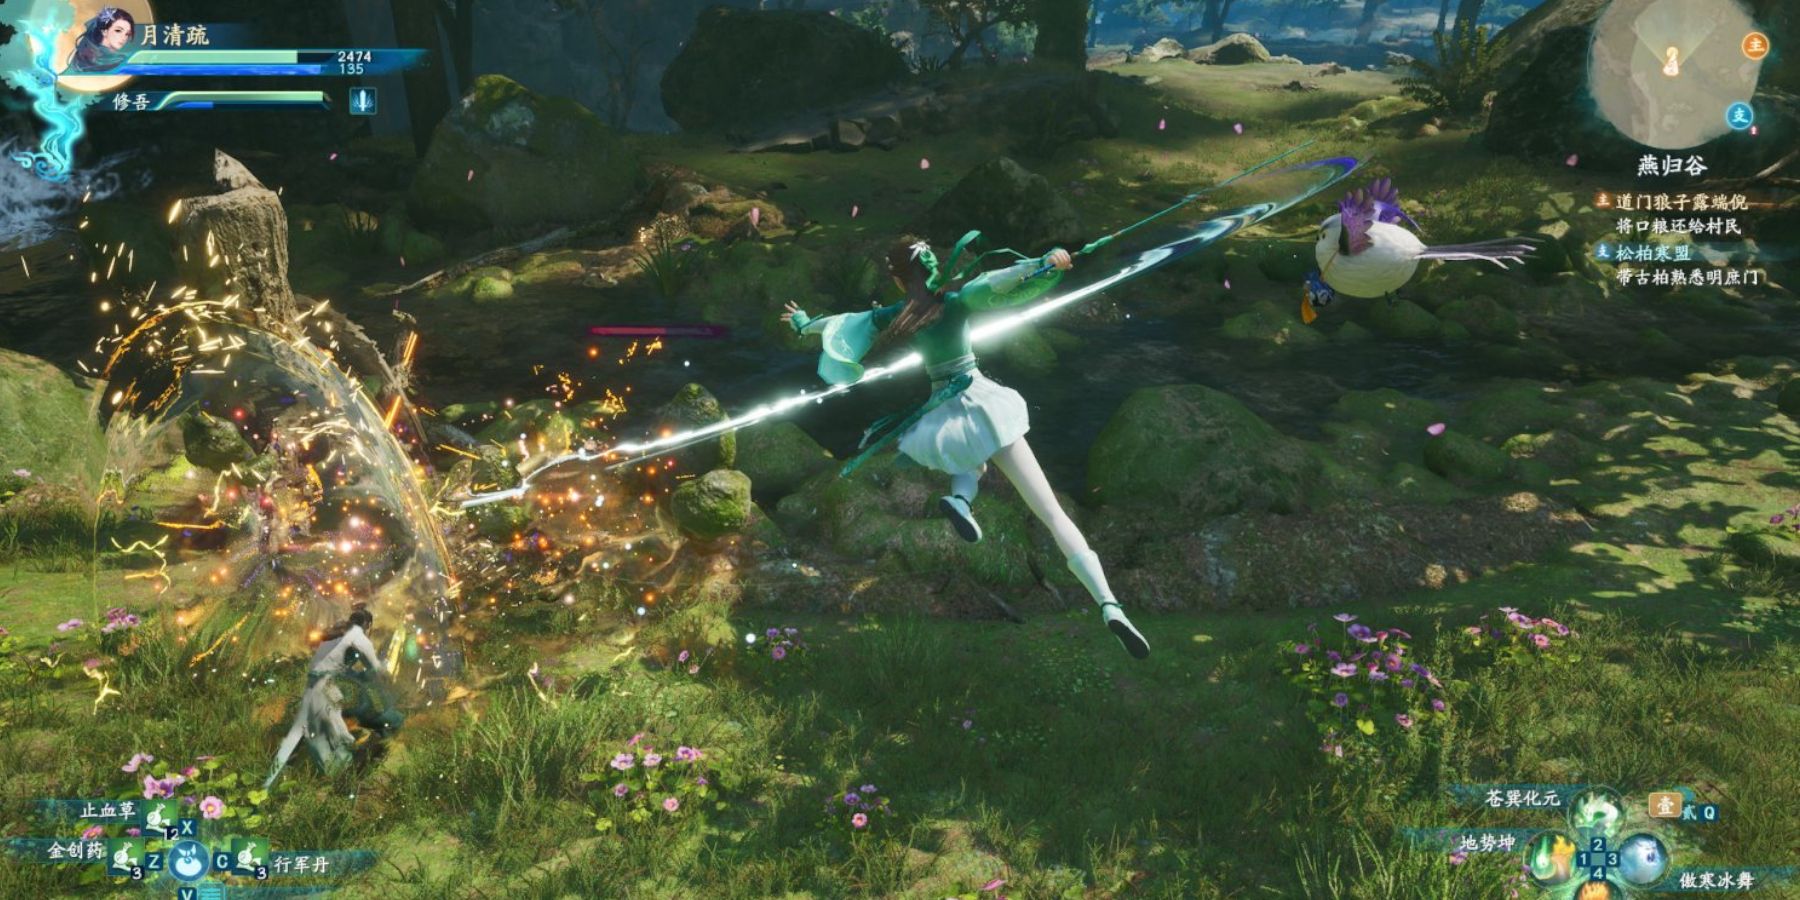 Yue QingShu attacking monsters in Sword and Fairy 7